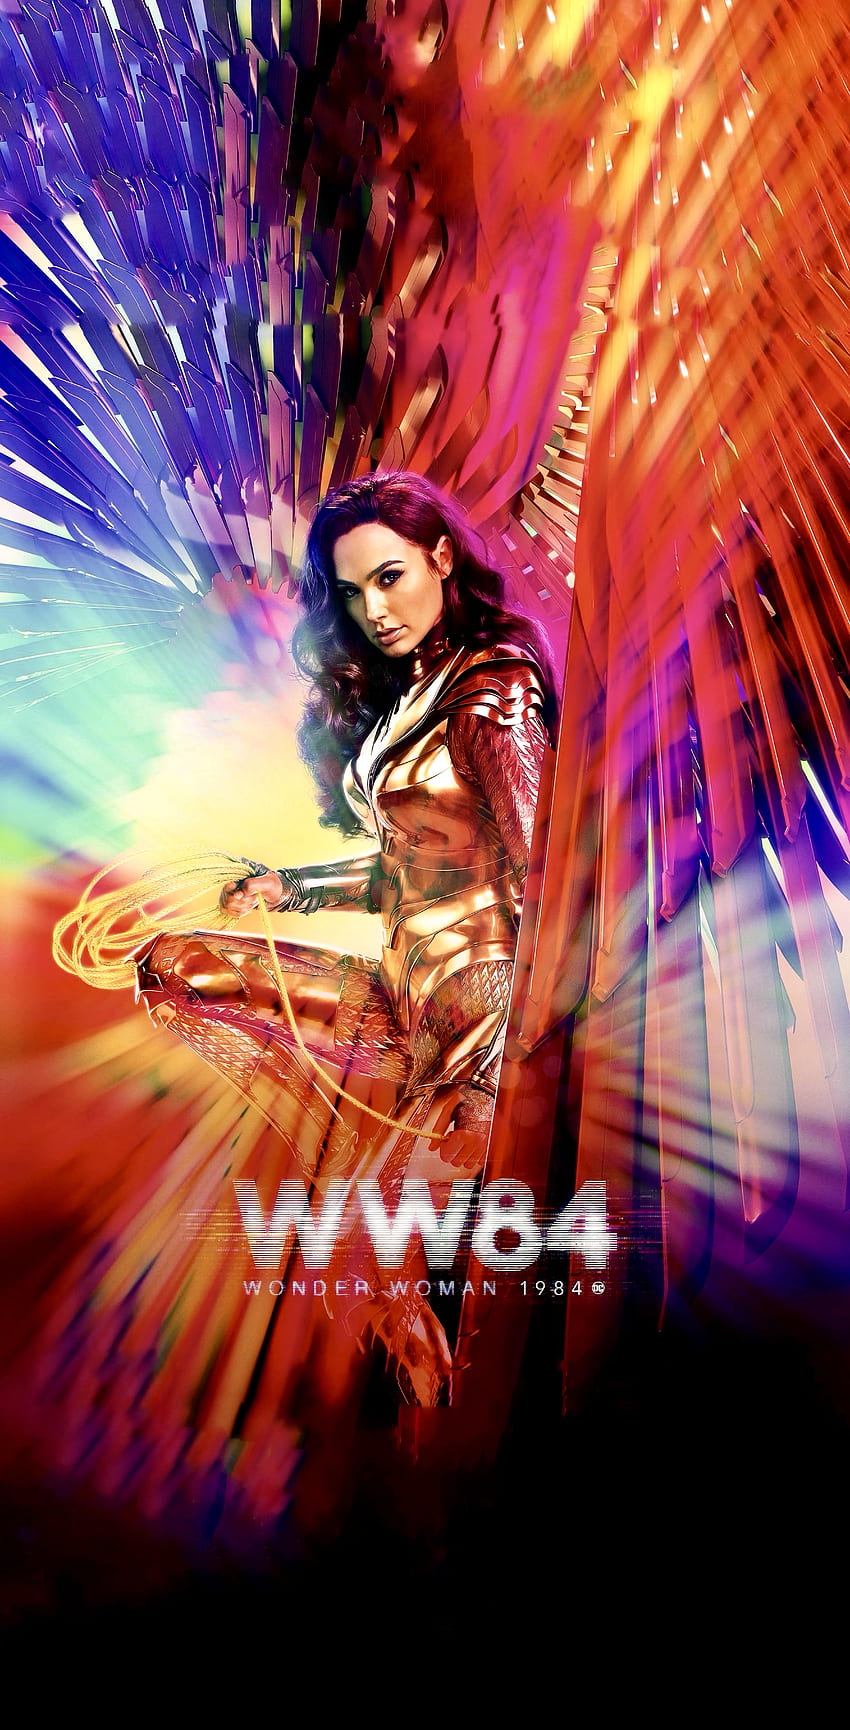 Wonder Woman 1984 (made the new poster high) in 2020. New poster, Wonder woman movie, Wonder woman, WW84 HD電話の壁紙